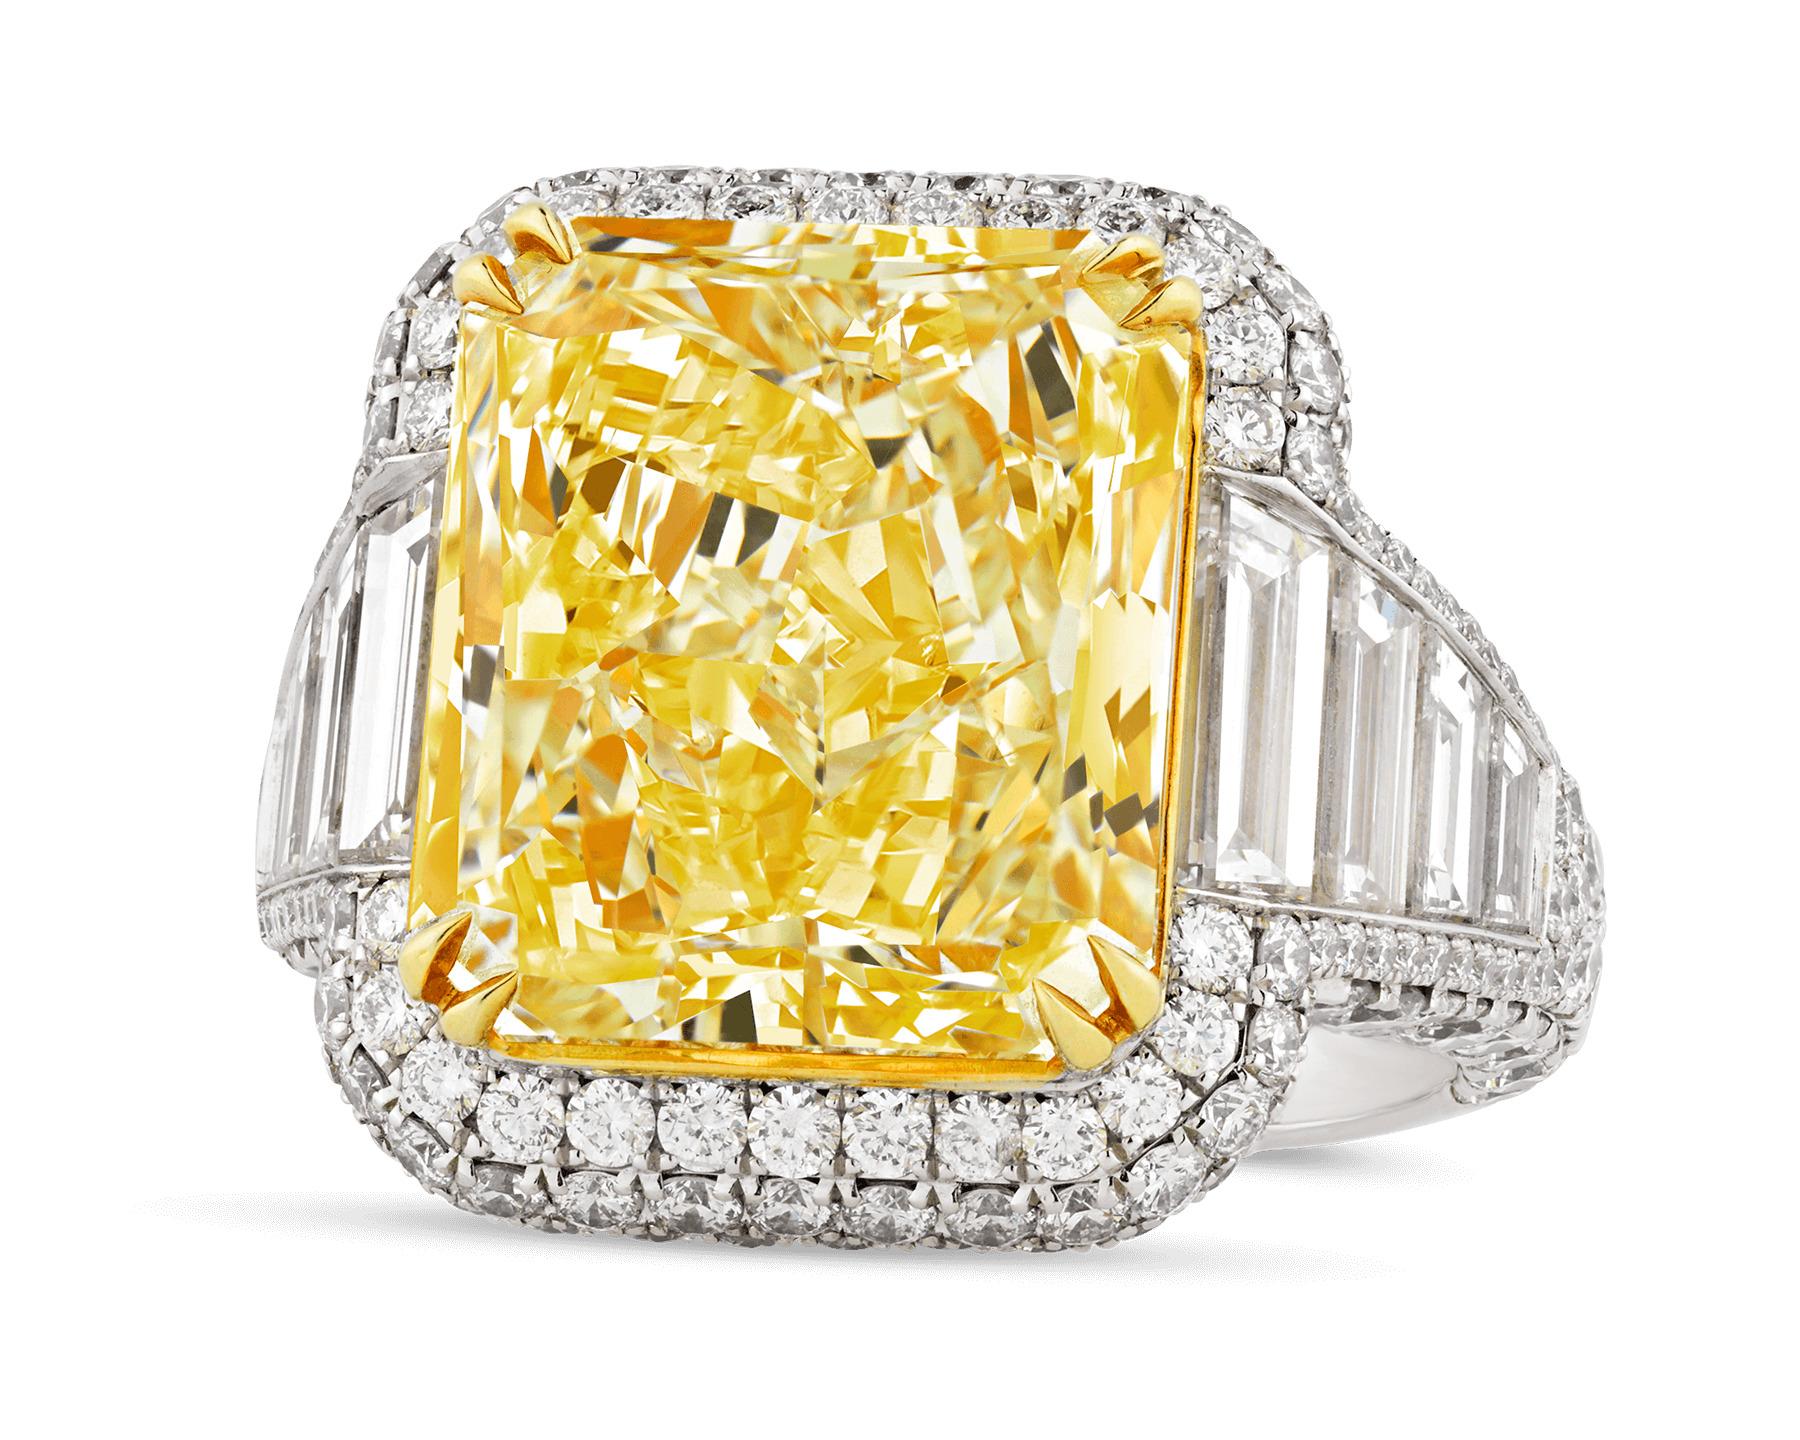 The monumental natural fancy yellow diamond in this ring totals 10.02 brilliant carats. Yellow diamonds are among the most coveted gemstones in the world, and this is a truly spectacular example of their beauty. The diamond is certified by the